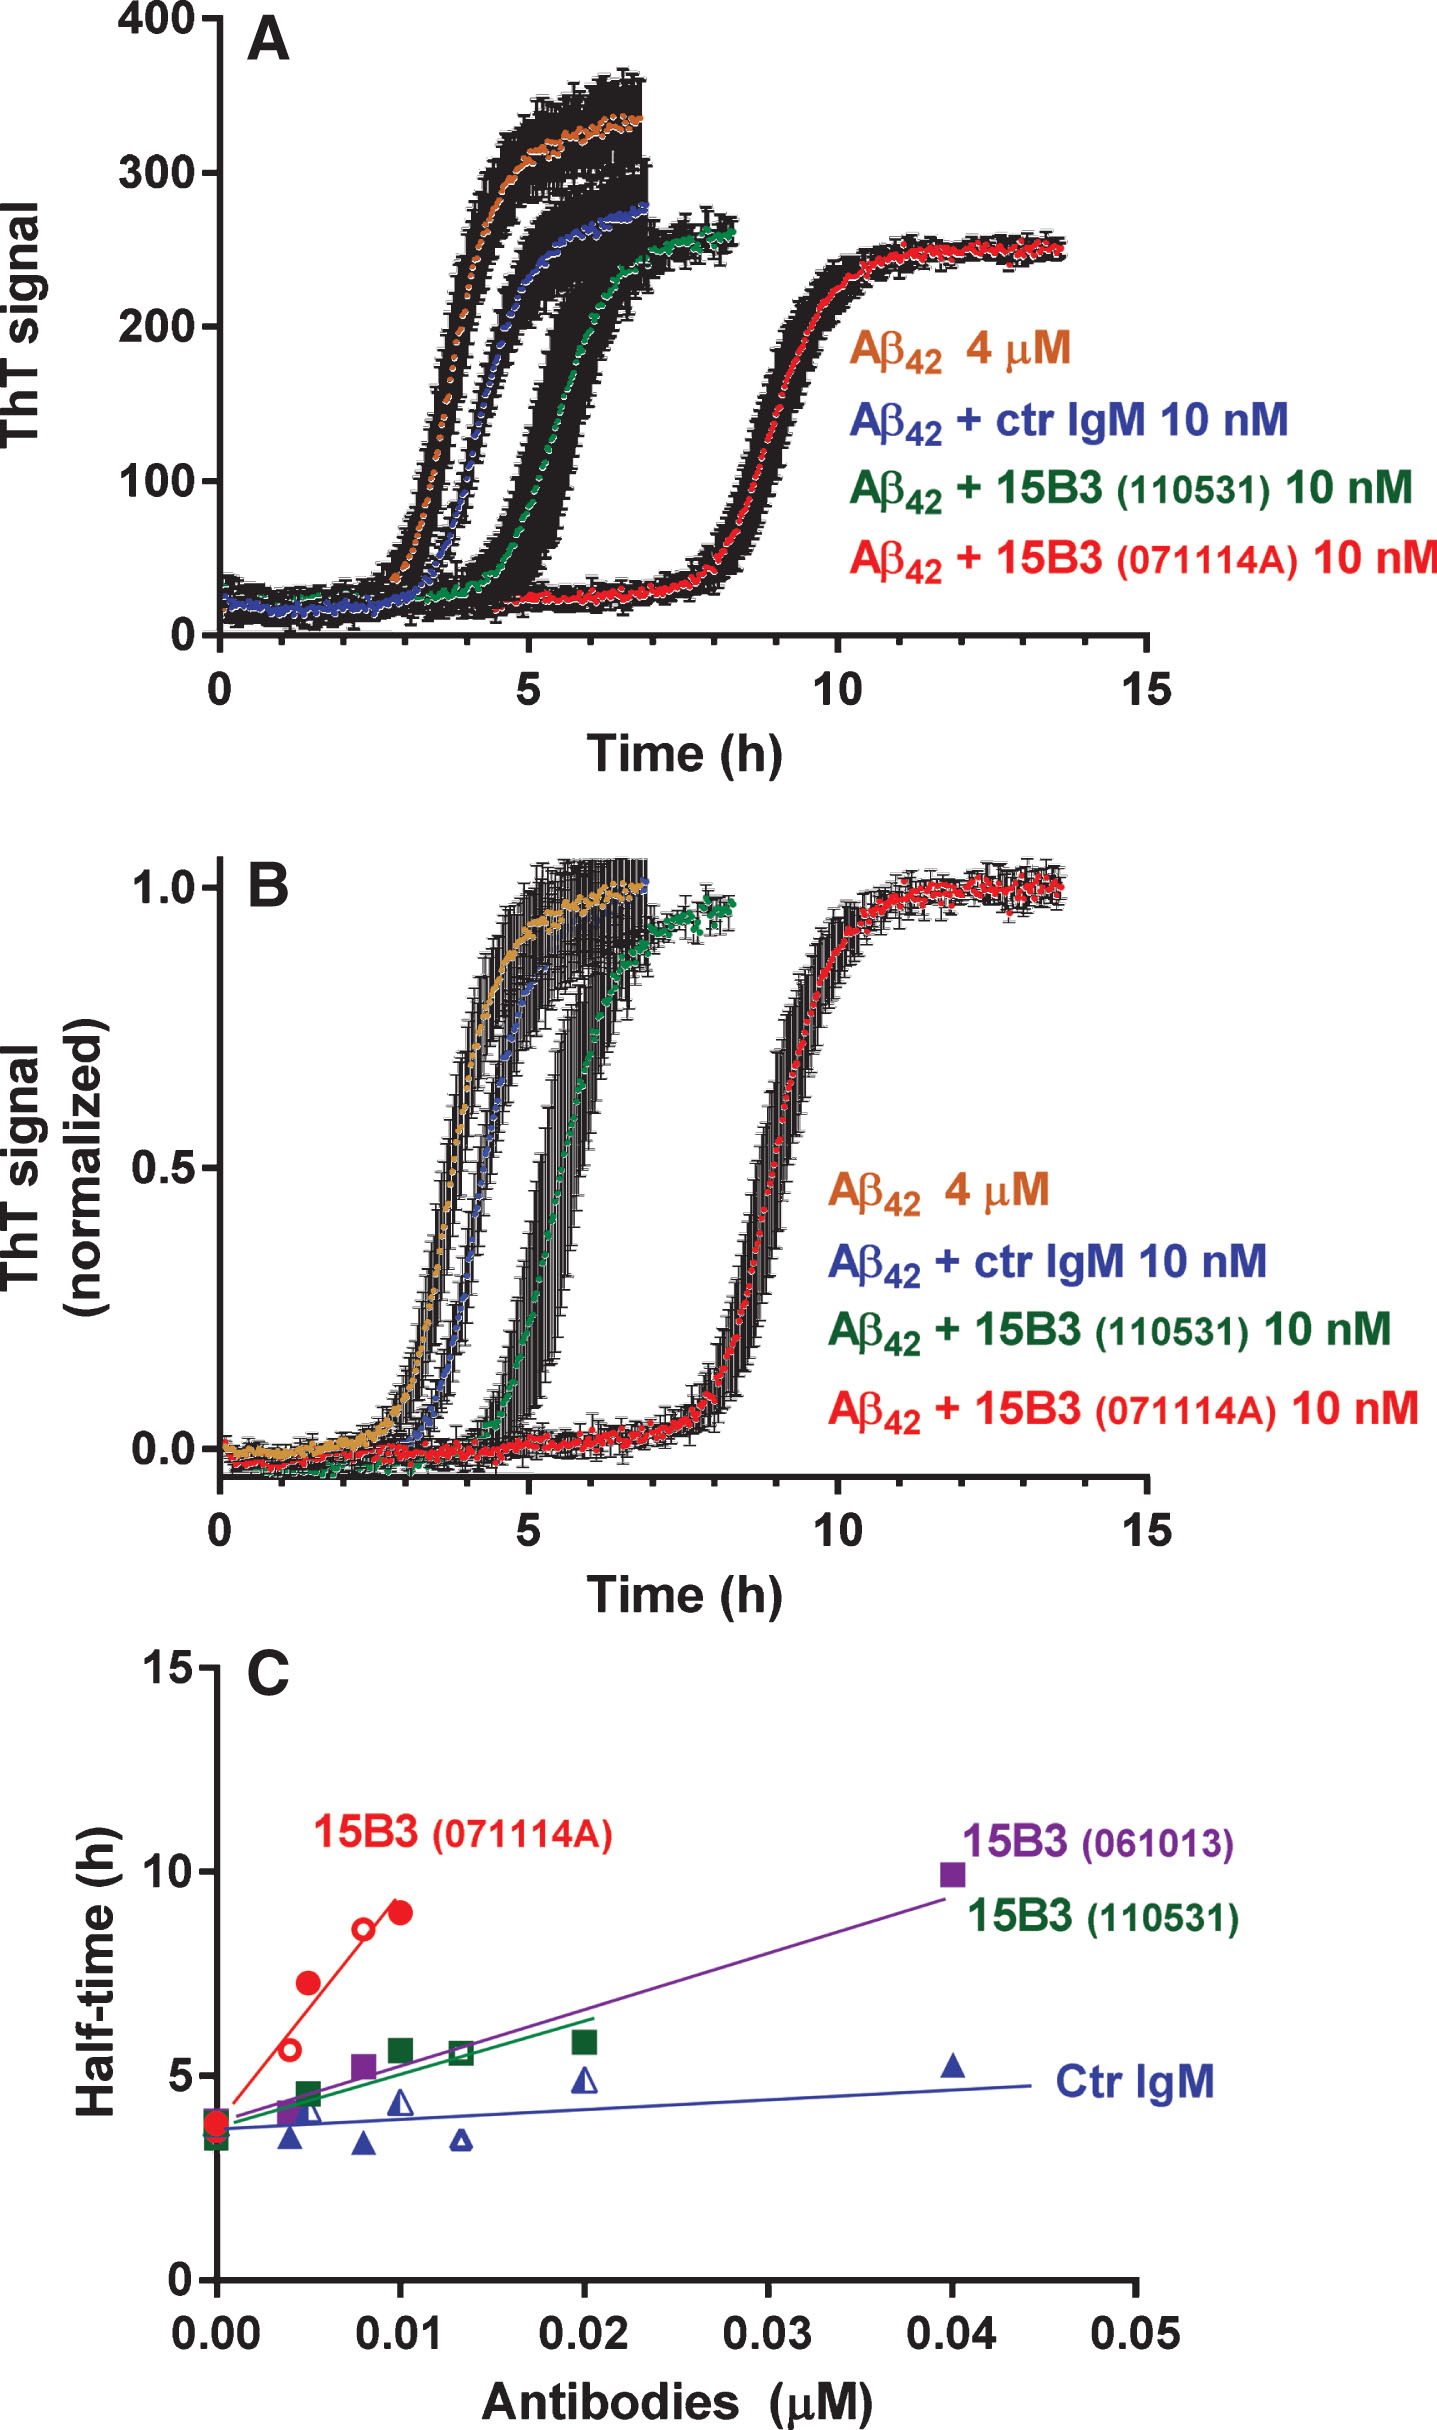 Effect of 15B3 on Aβ42 fibrillogenesis, evaluated by ThT fluorescence—Synthetic Aβ42 (4 μM) was incubated with ThT (20 μM) with or without 15B3 or control IgM, and ThT fluorescence was monitored every 2.5 min. Three batches of 15B3 were used for these studies, as indicated. A) Representative raw fluorescent values. B) Normalization of the data in A on the corresponding maximal values to illustrate better the shift in the half-time of transition, i.e., the time corresponding to half the maximum ThT signal. C) Half-time of transition of Aβ42 in the presence of different concentrations of the antibodies. Antibodies are identified by the colors; open or solid symbols indicate results of independent experiments.